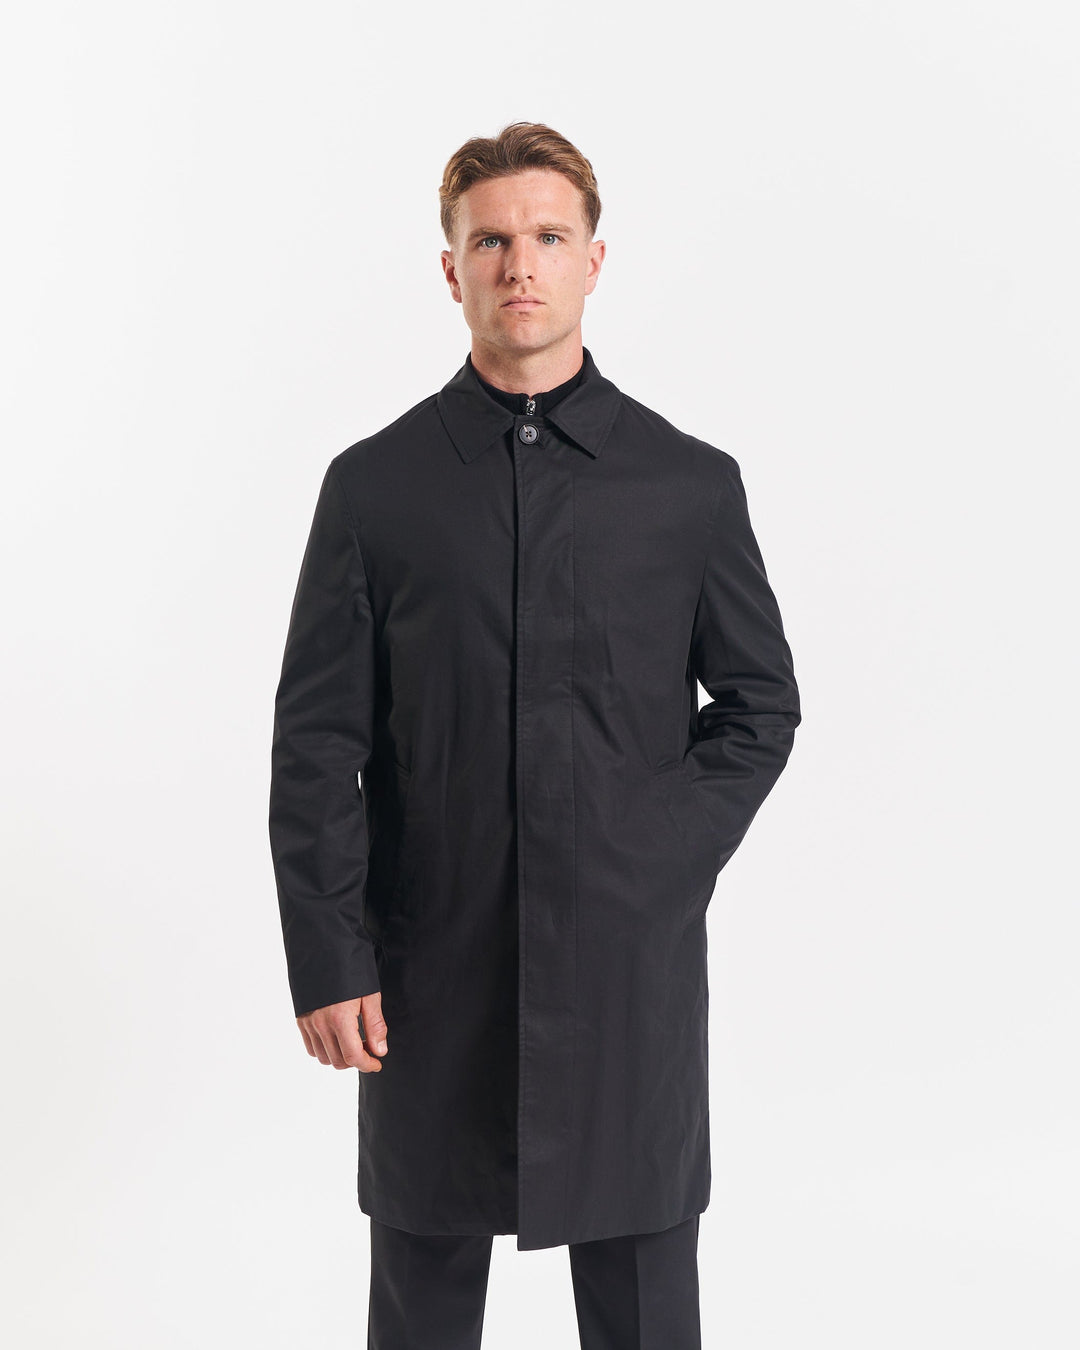 THE LUTHER MAC SHOWERPROOF - BLACK – Kalibre Clothing